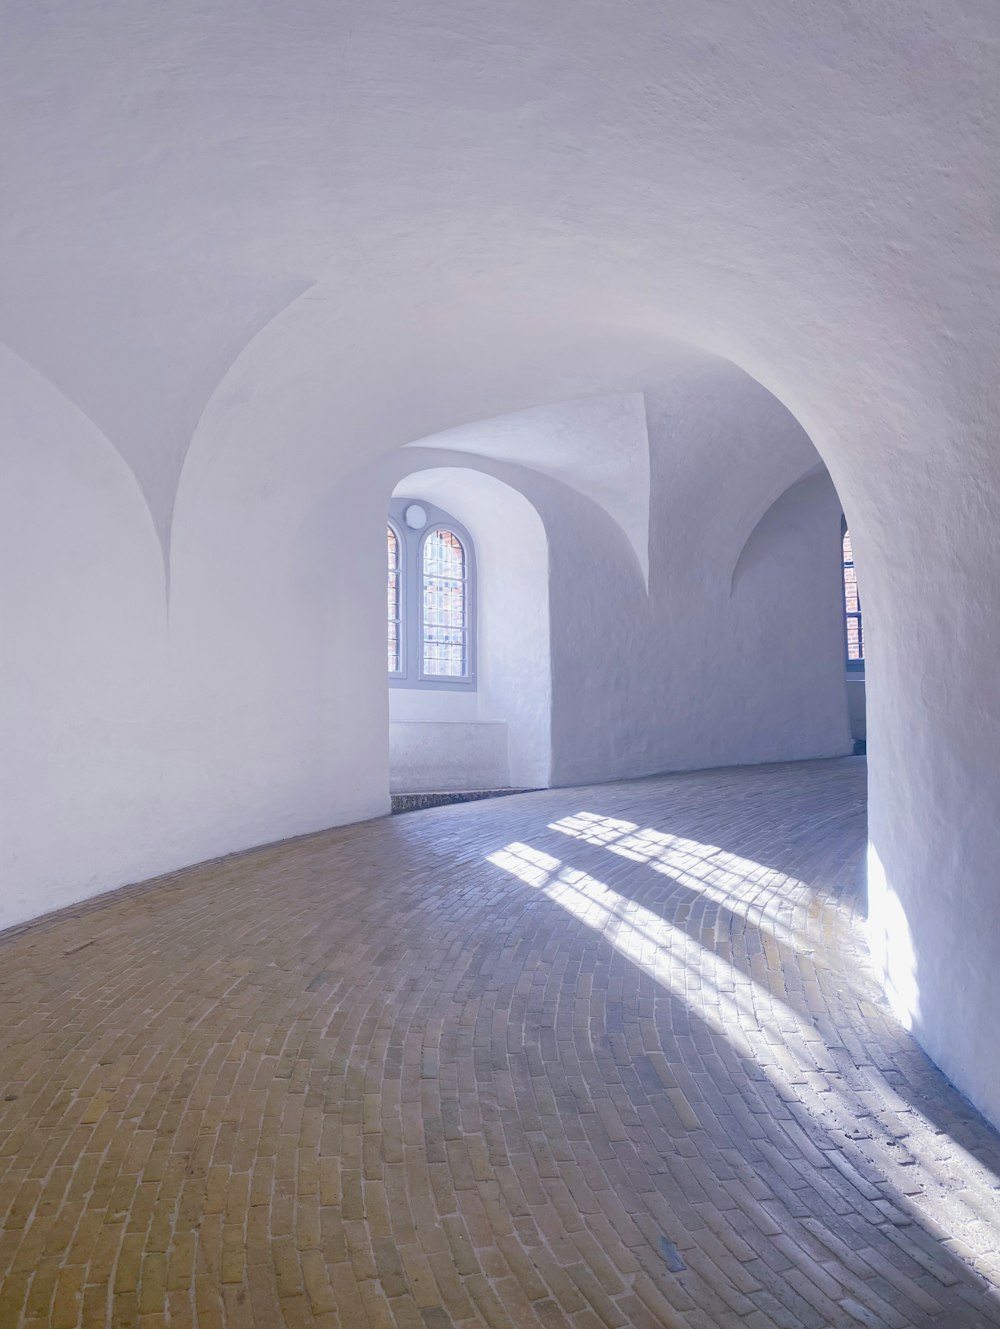 a white room with a brick floor and arched windows